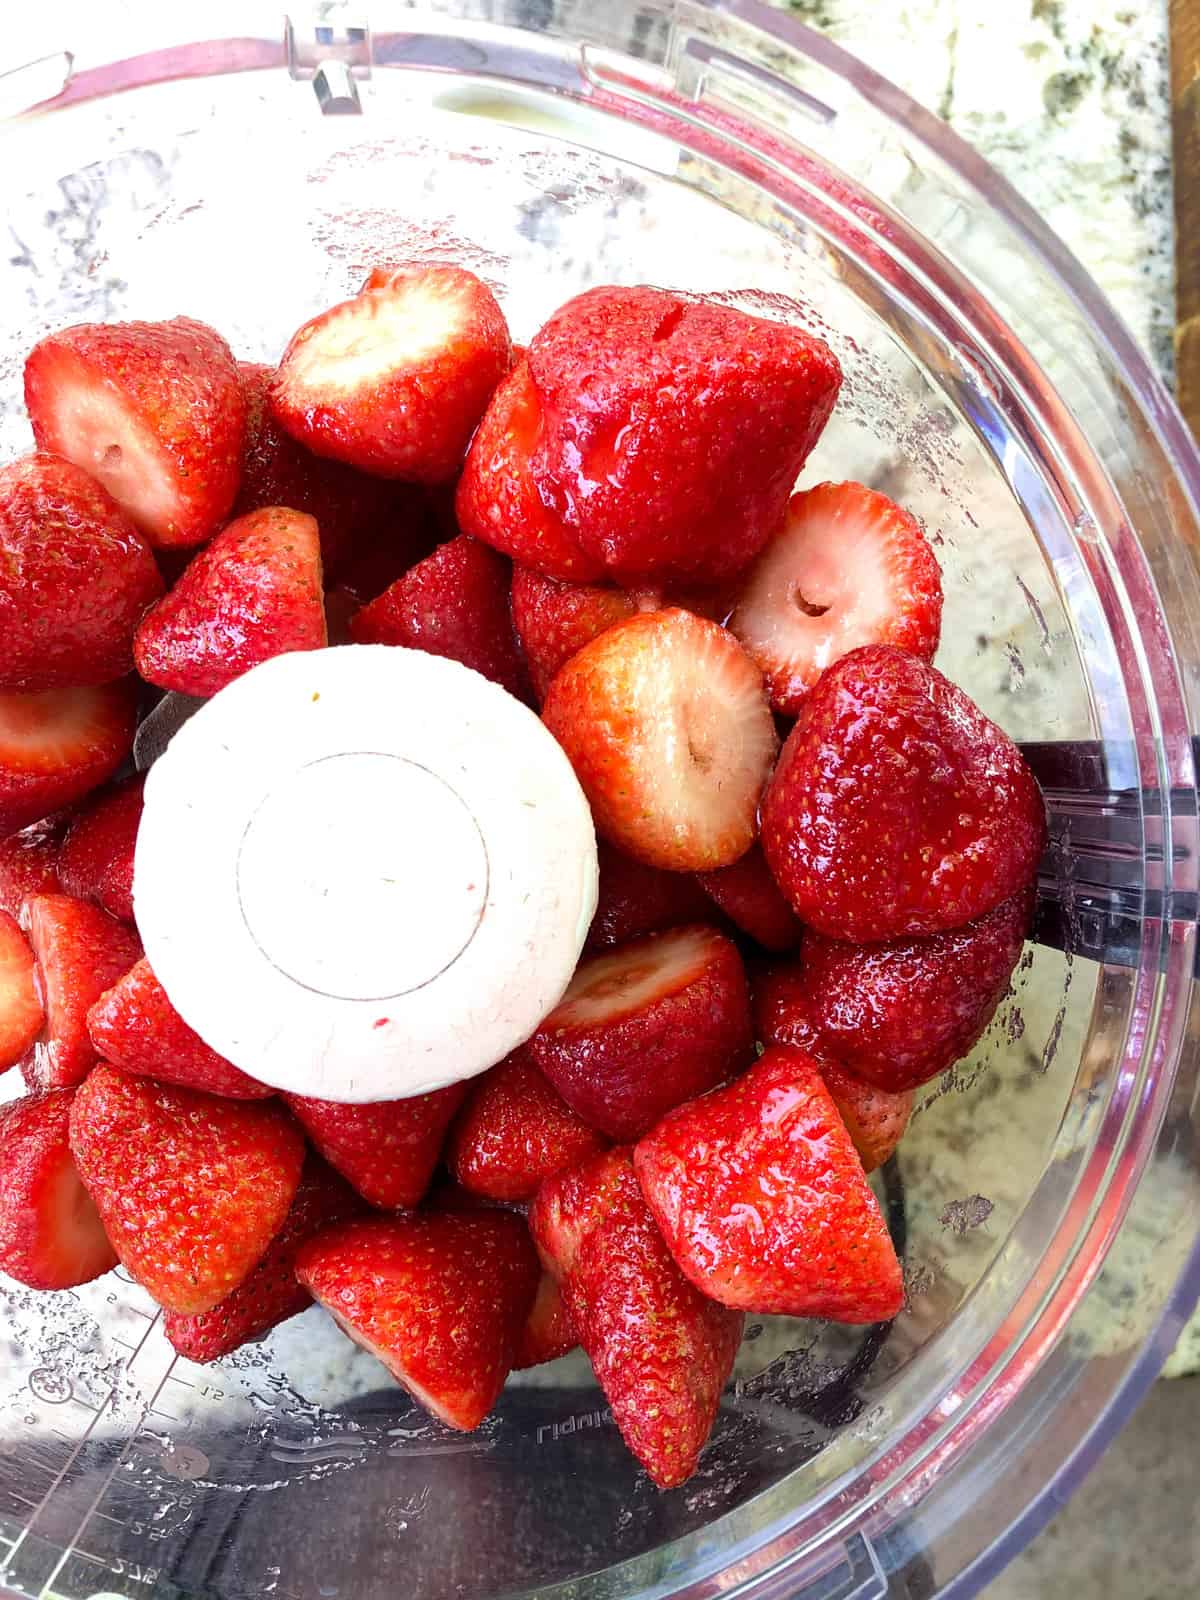 Place the macerated strawberries in a blender or food processor and mix to combine.  Add in fresh lime juice.